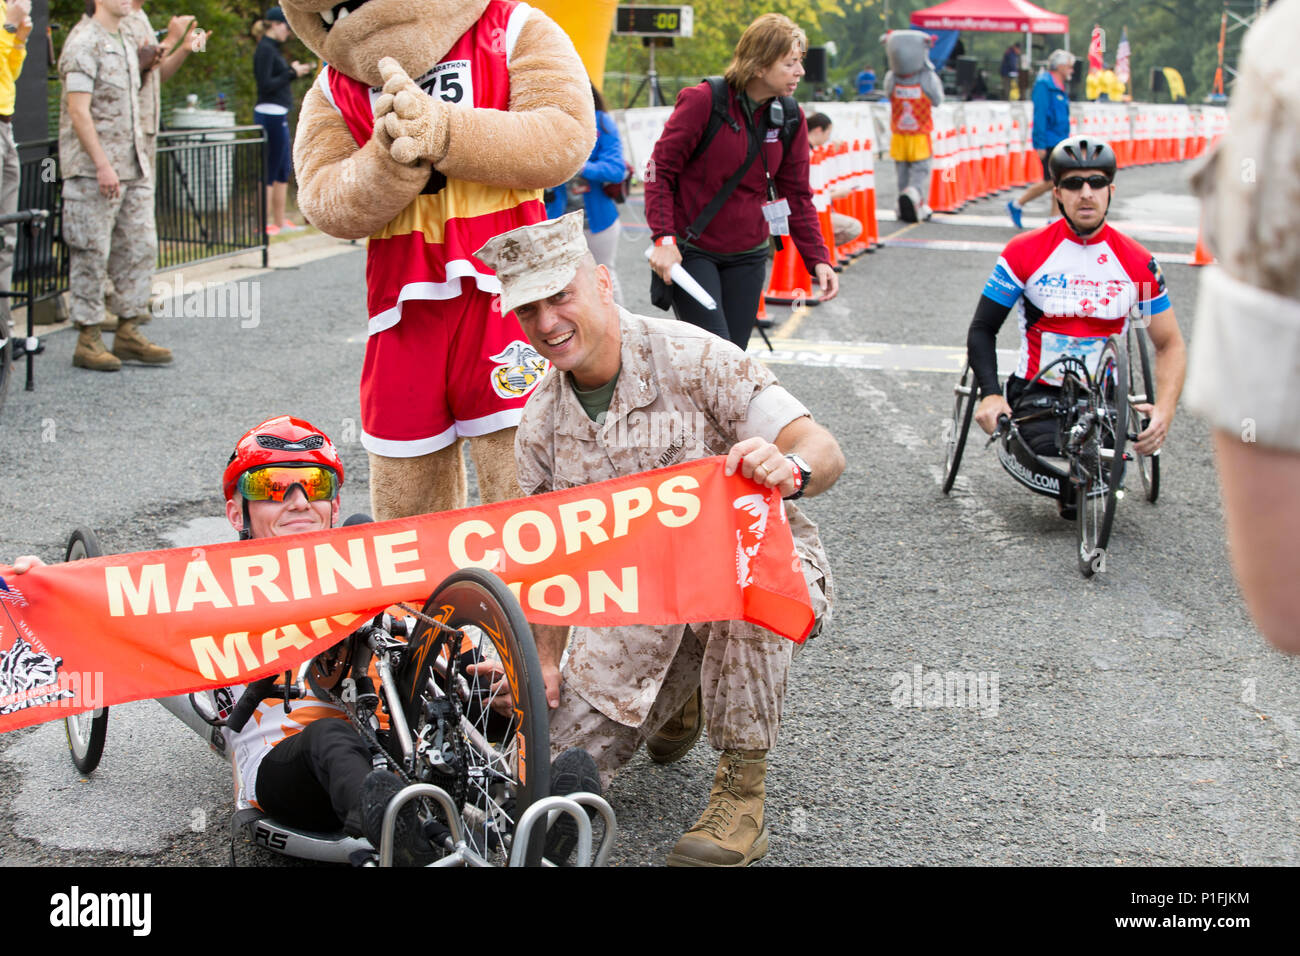 U.S Marine Corps Col. Joseph M. Murray, commander of Marine Corps Base Quantico, poses with Arkadiusz Skrzypinski of New York, NY, 1st place handcrank winner of the 41st Marine Corps Marathon, at the finish line near the Marine Corps War Memorial in Arlington, Va., Oct. 30, 2016. Also known as 'The People's Marathon,' the 26.2 mile race drew roughly 30,000 participants to promote physical fitness, generate goodwill in the community, and showcase the organizational skills of the Marine Corps. (U.S. Marine Corps photo by Staff Sgt. Sarah R. Hickory) Stock Photo